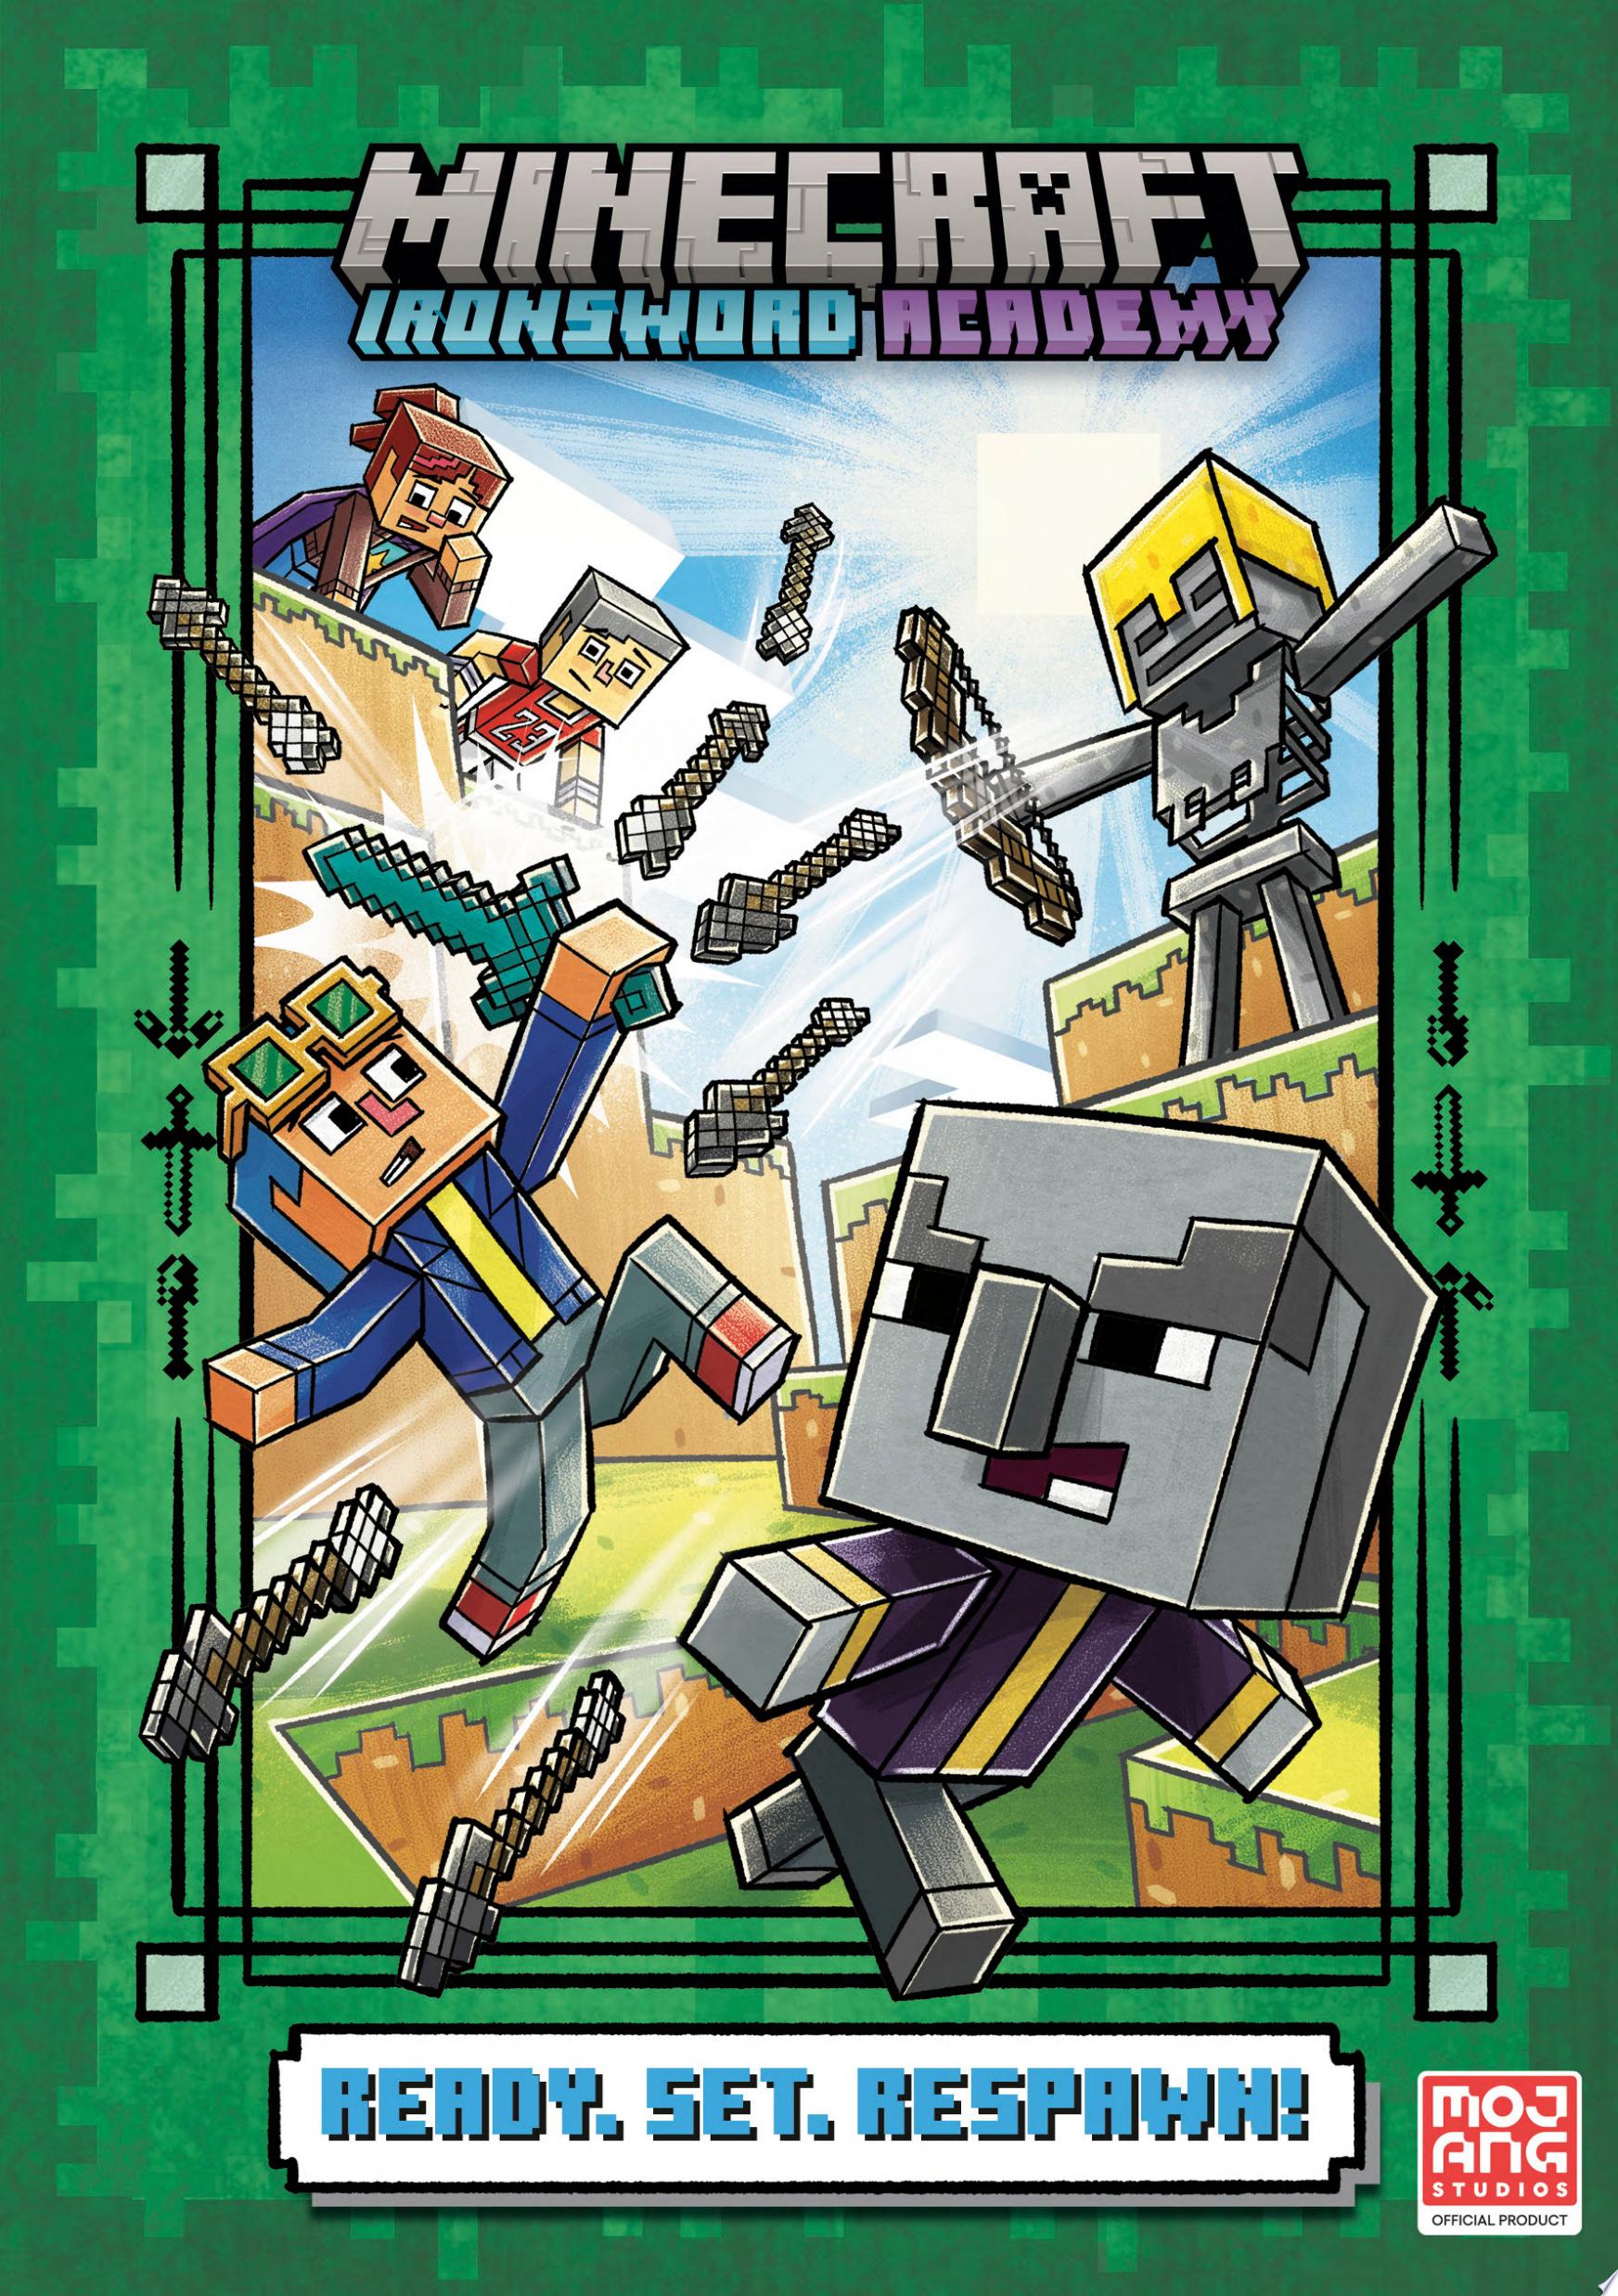 Image for "Ready. Set. Respawn! (Minecraft Ironsword Academy #1)"